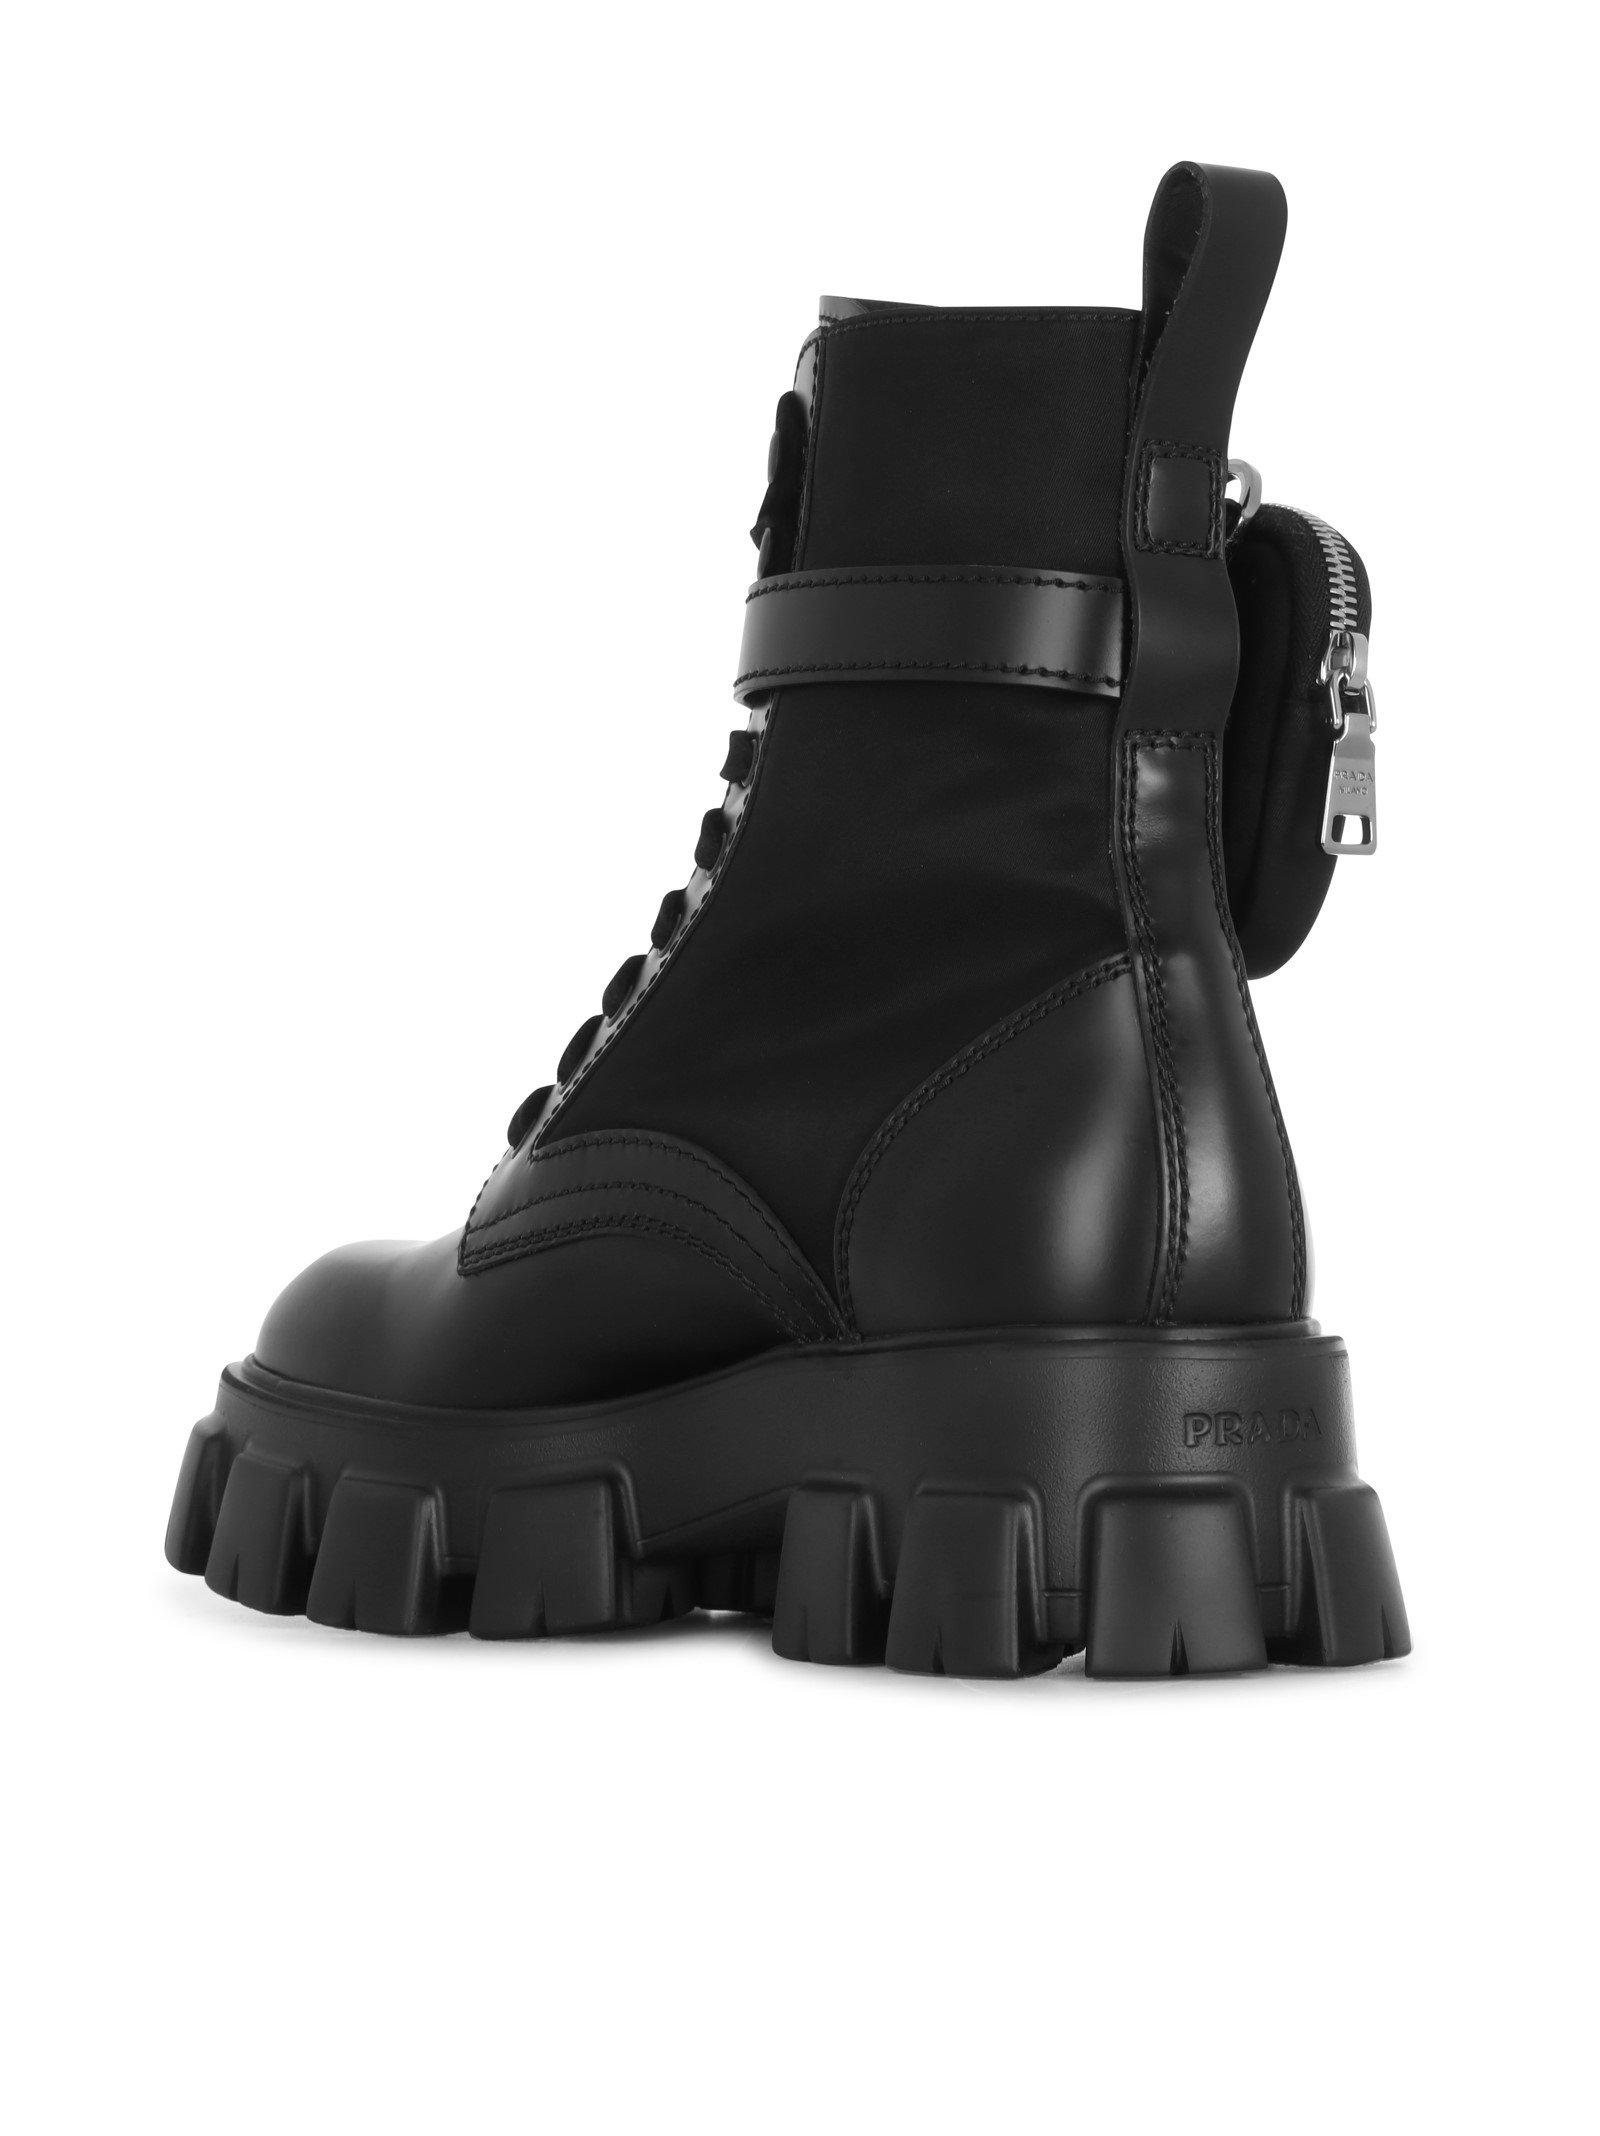 Prada Ankle Pouch Combat Boots in Black for Men - Lyst